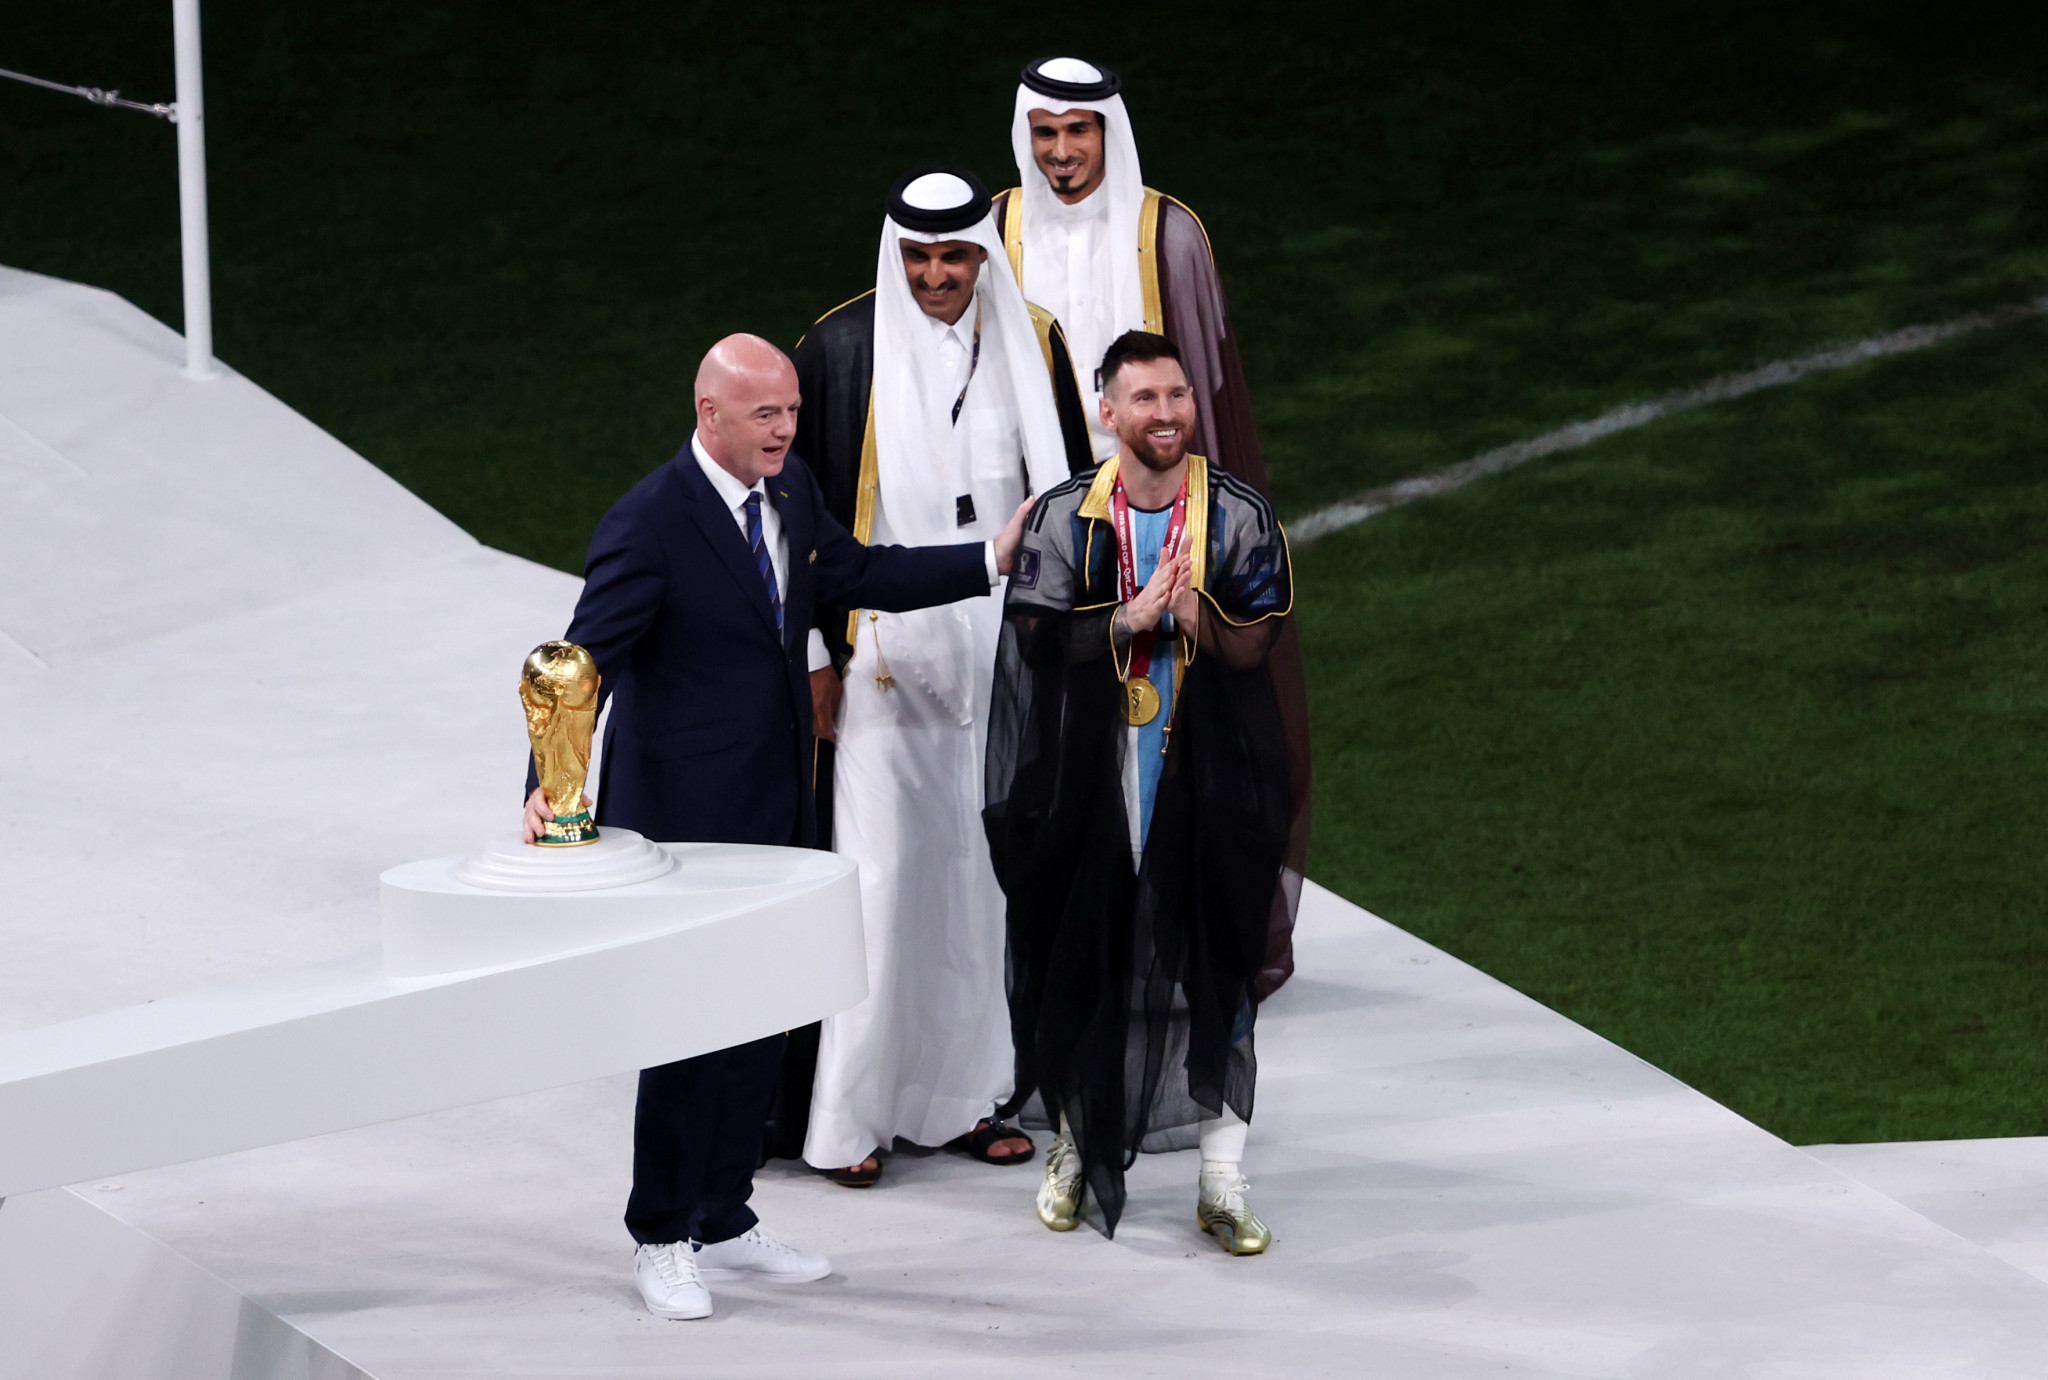 FIFA President Gianni Infantino giving Lionel Messi the World Cup trophy ©Getty Images